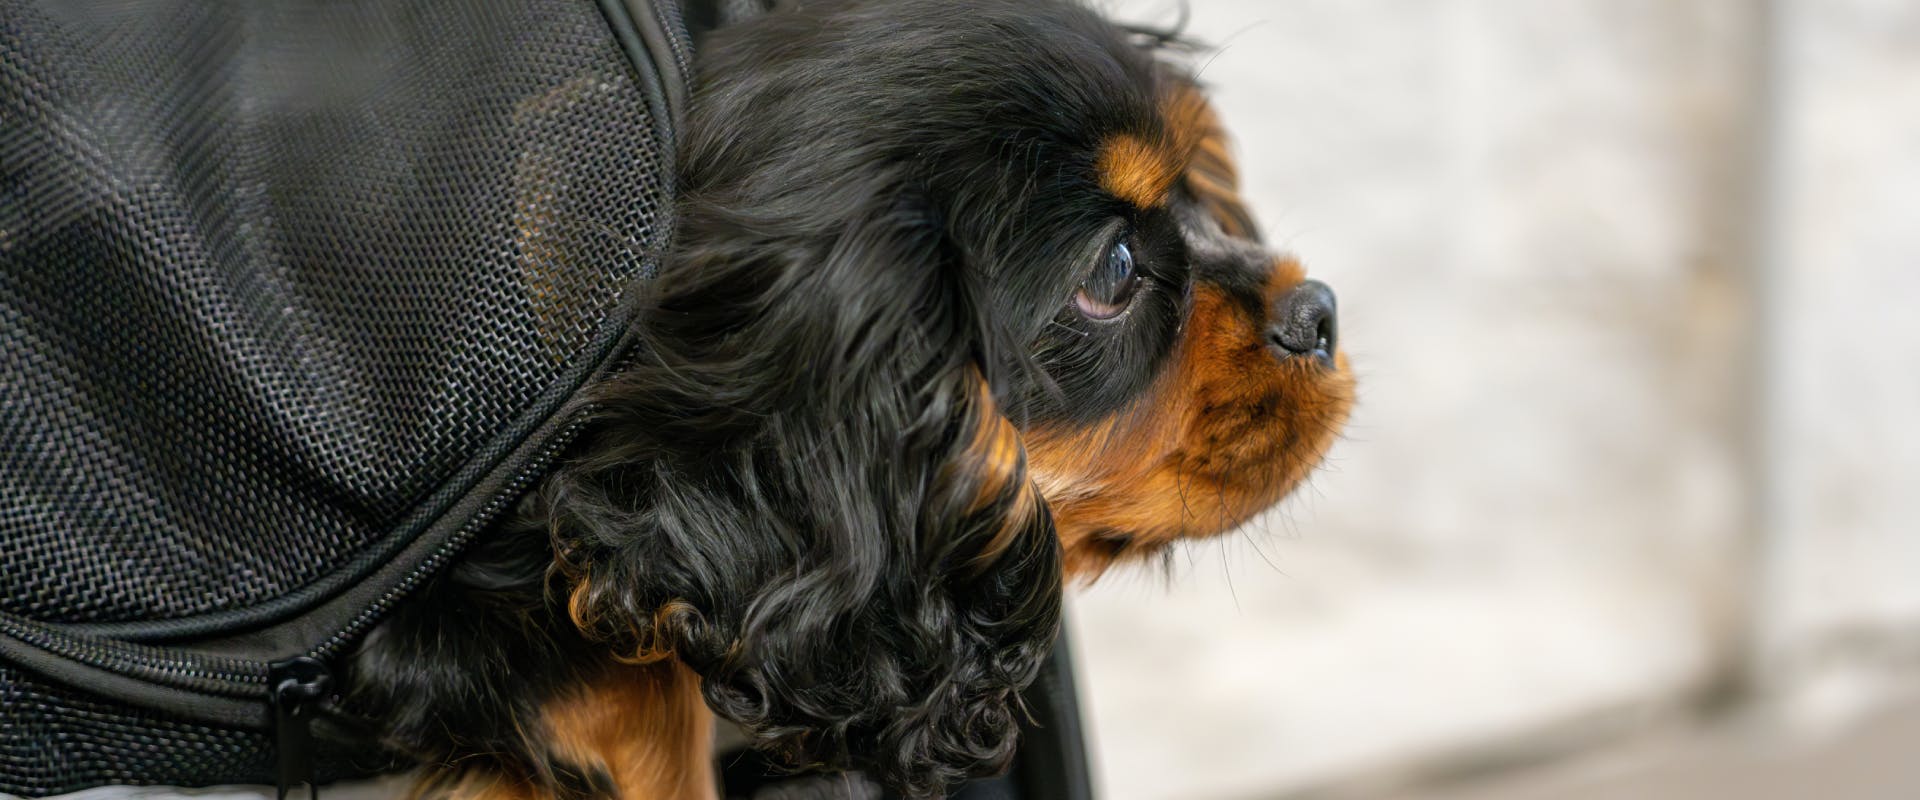 a young king charles spaniel poking its head out from inside a fabric travel dog crate